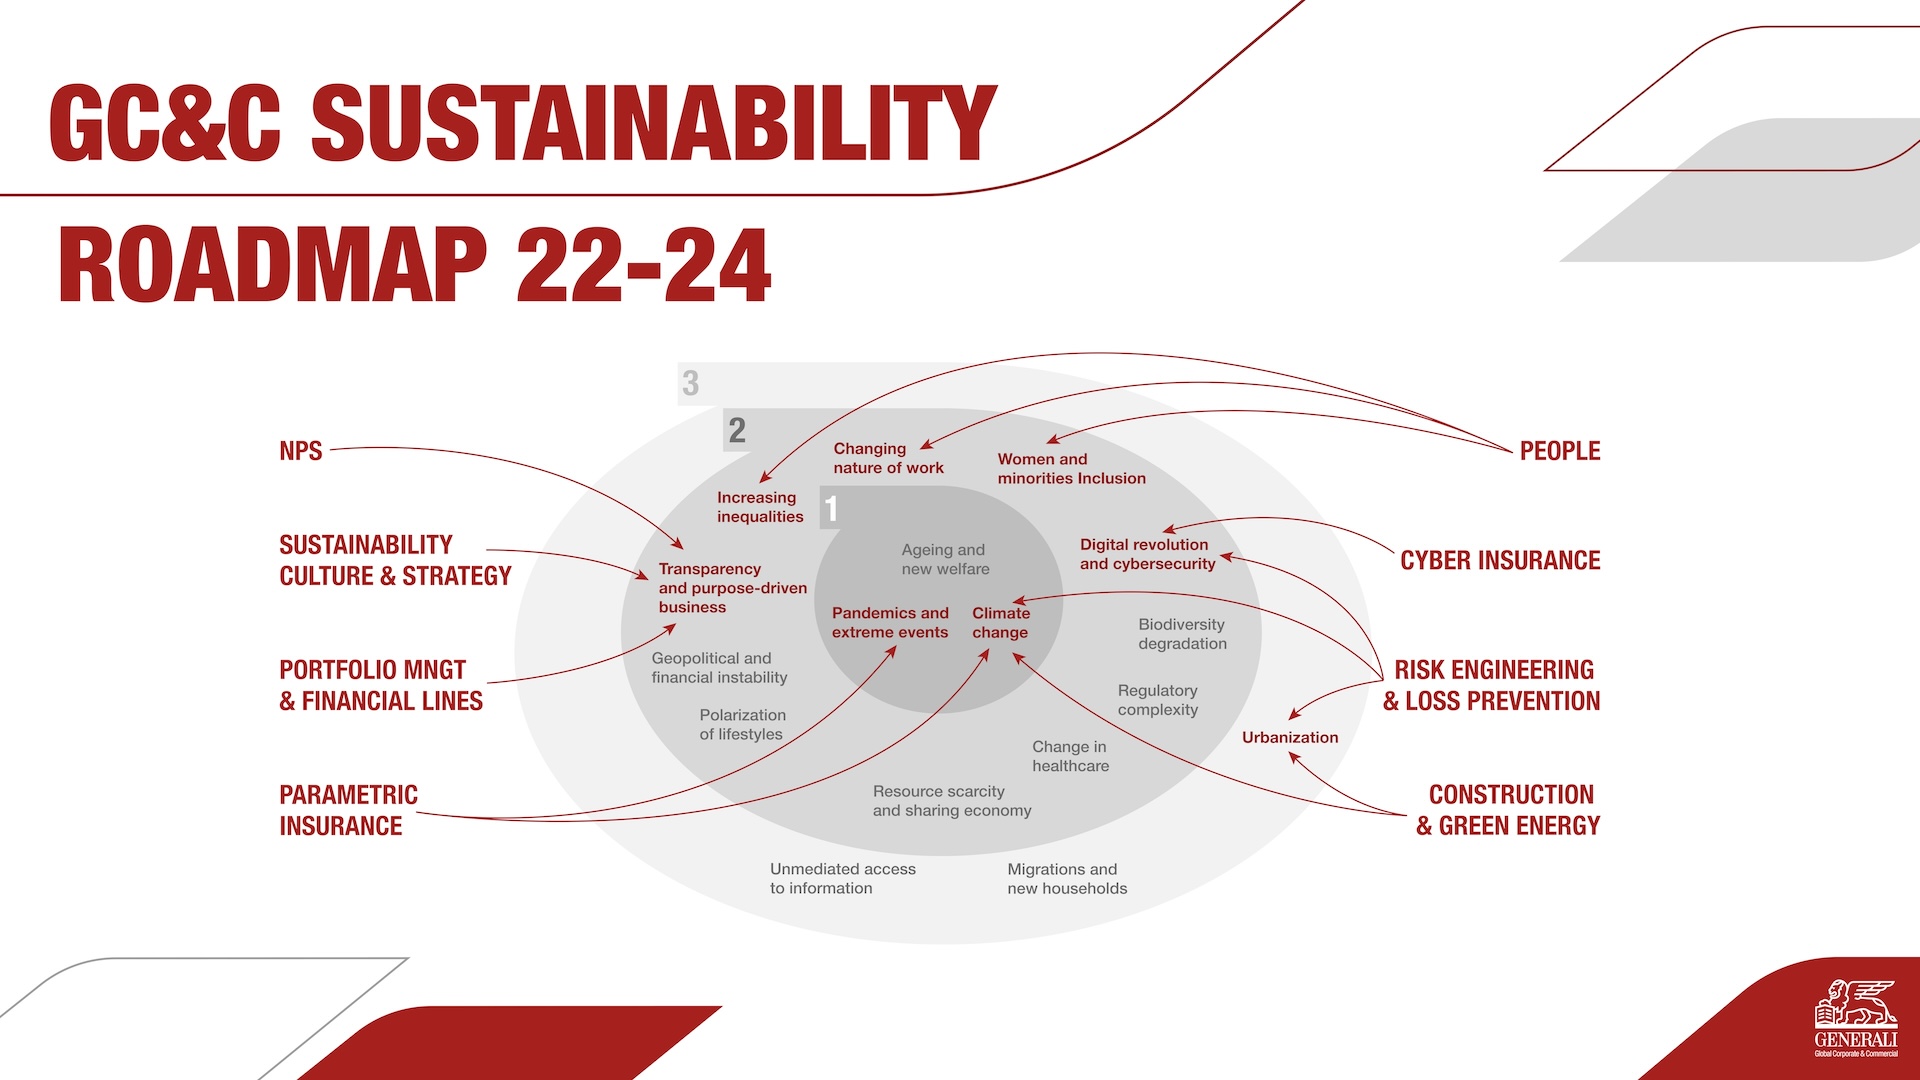 Our Sustainability Approach